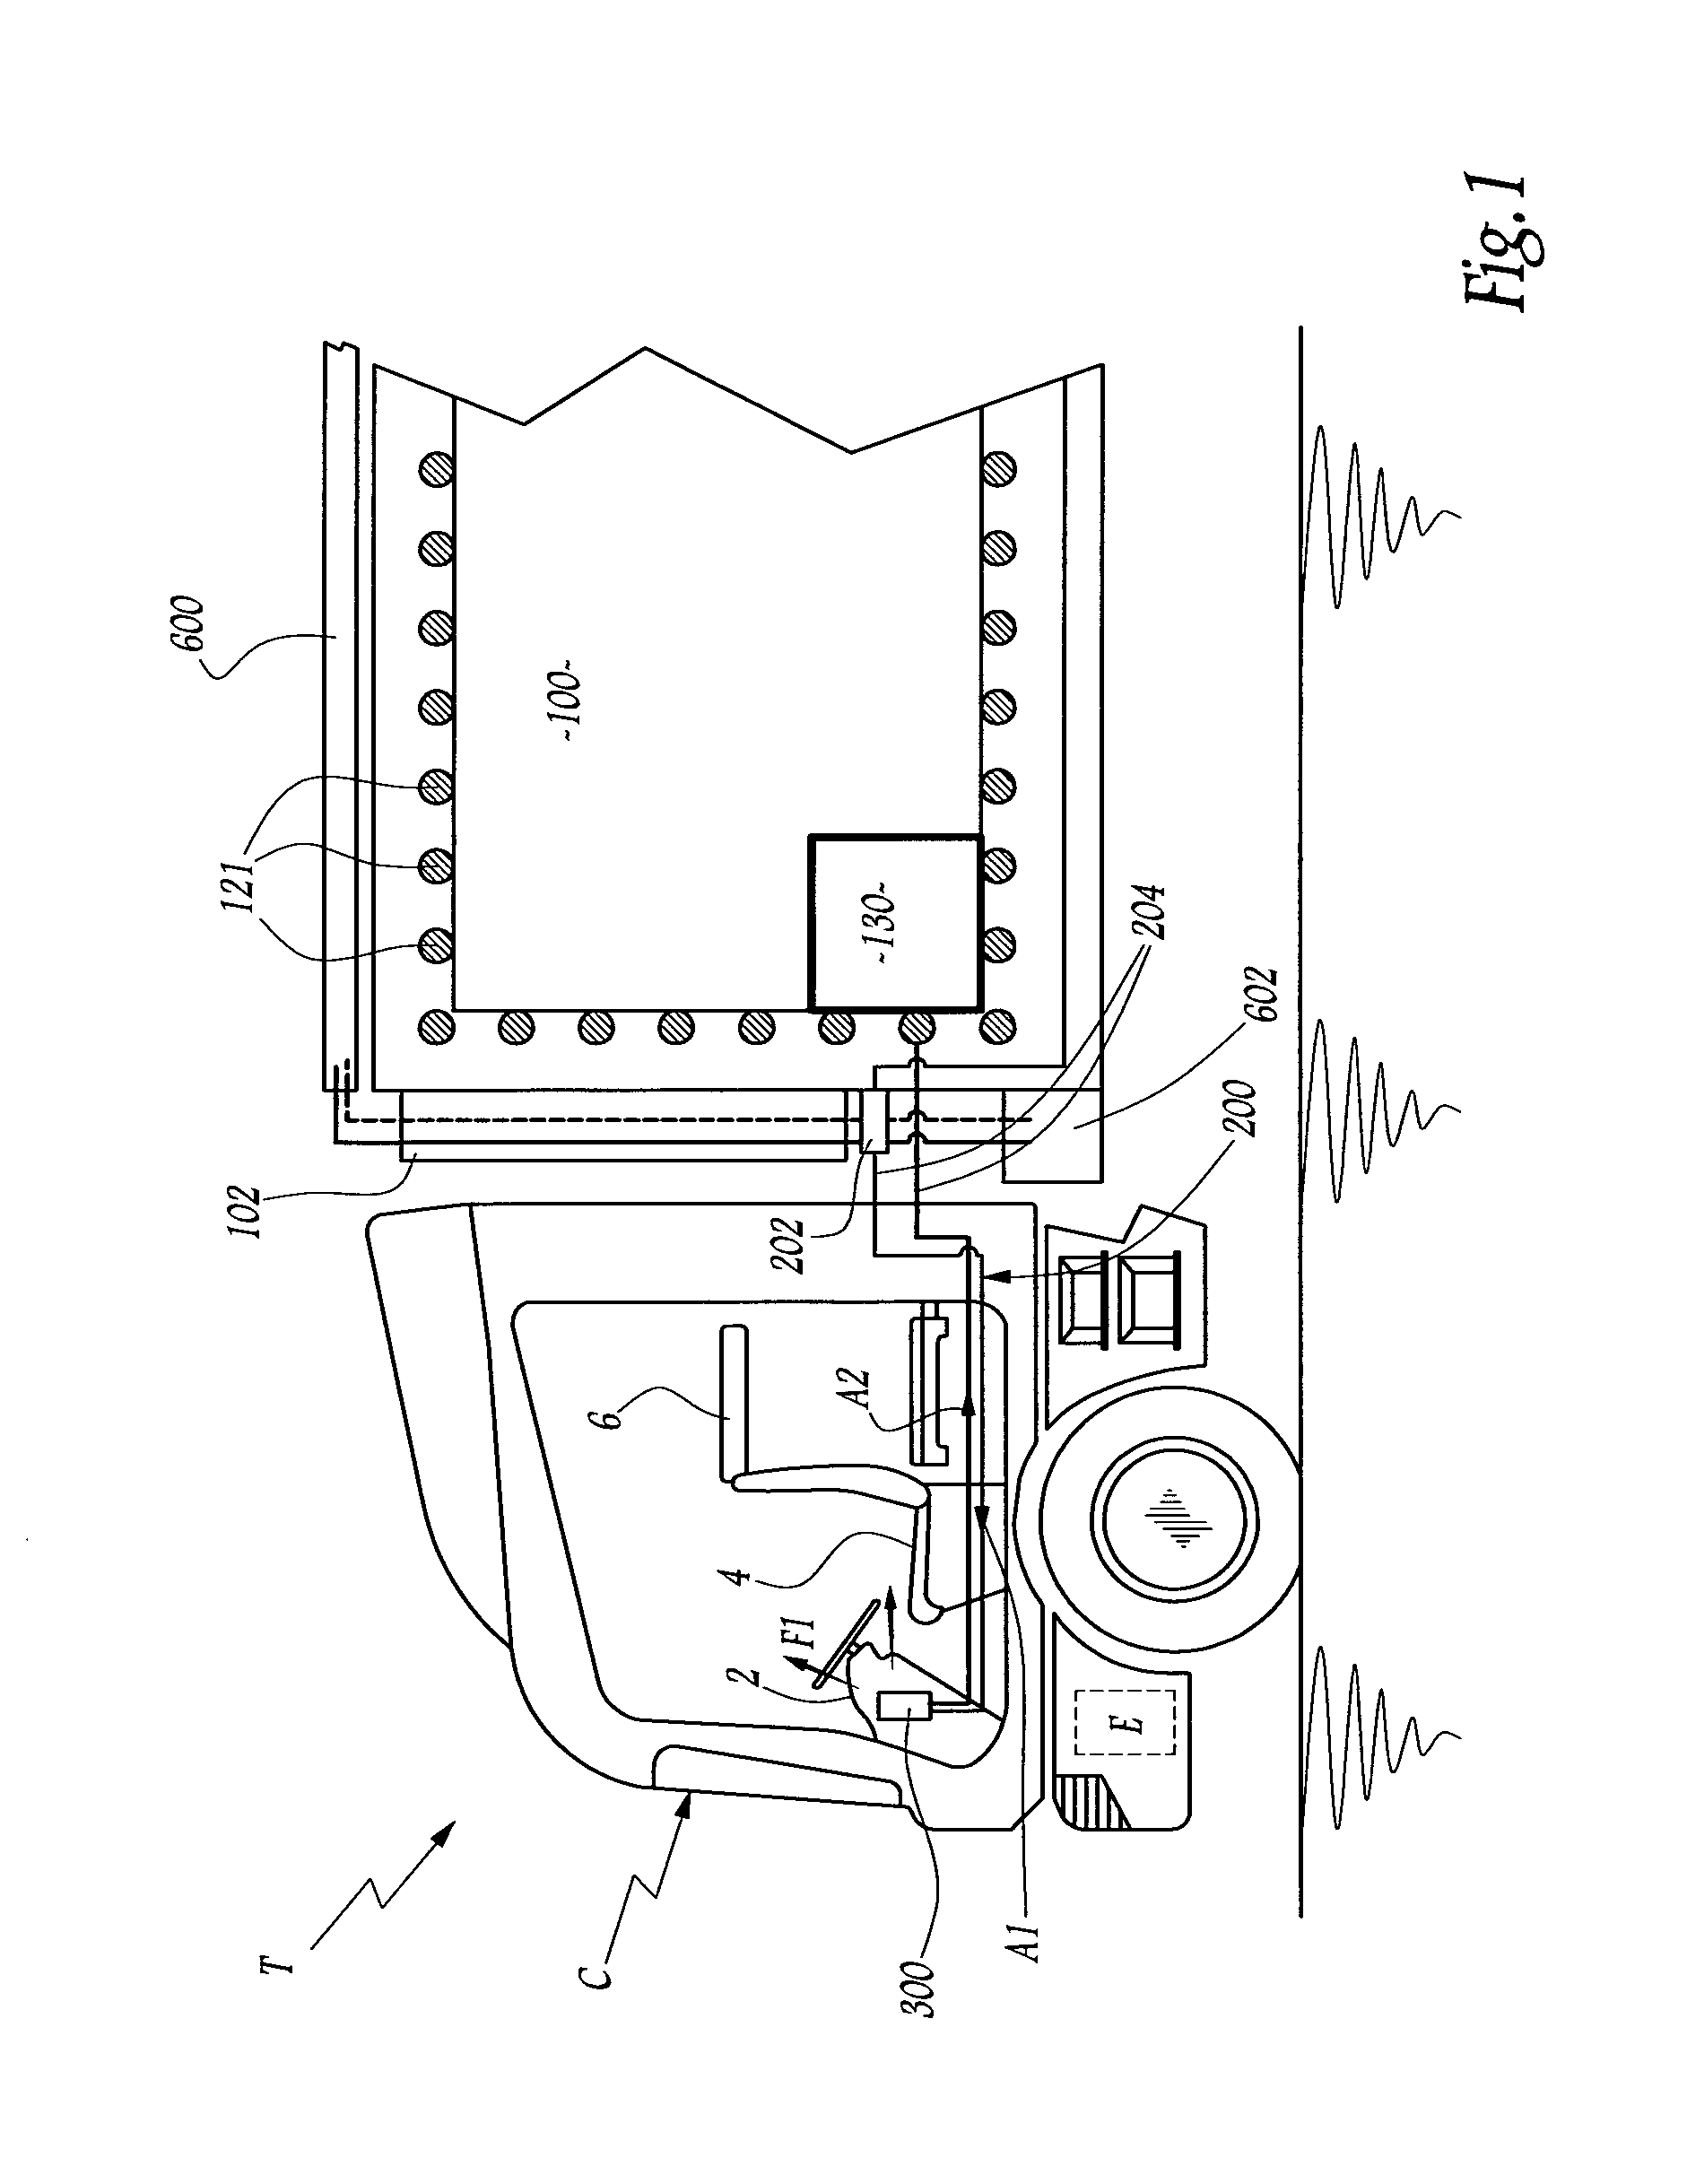 Truck with a refrigerated compartment